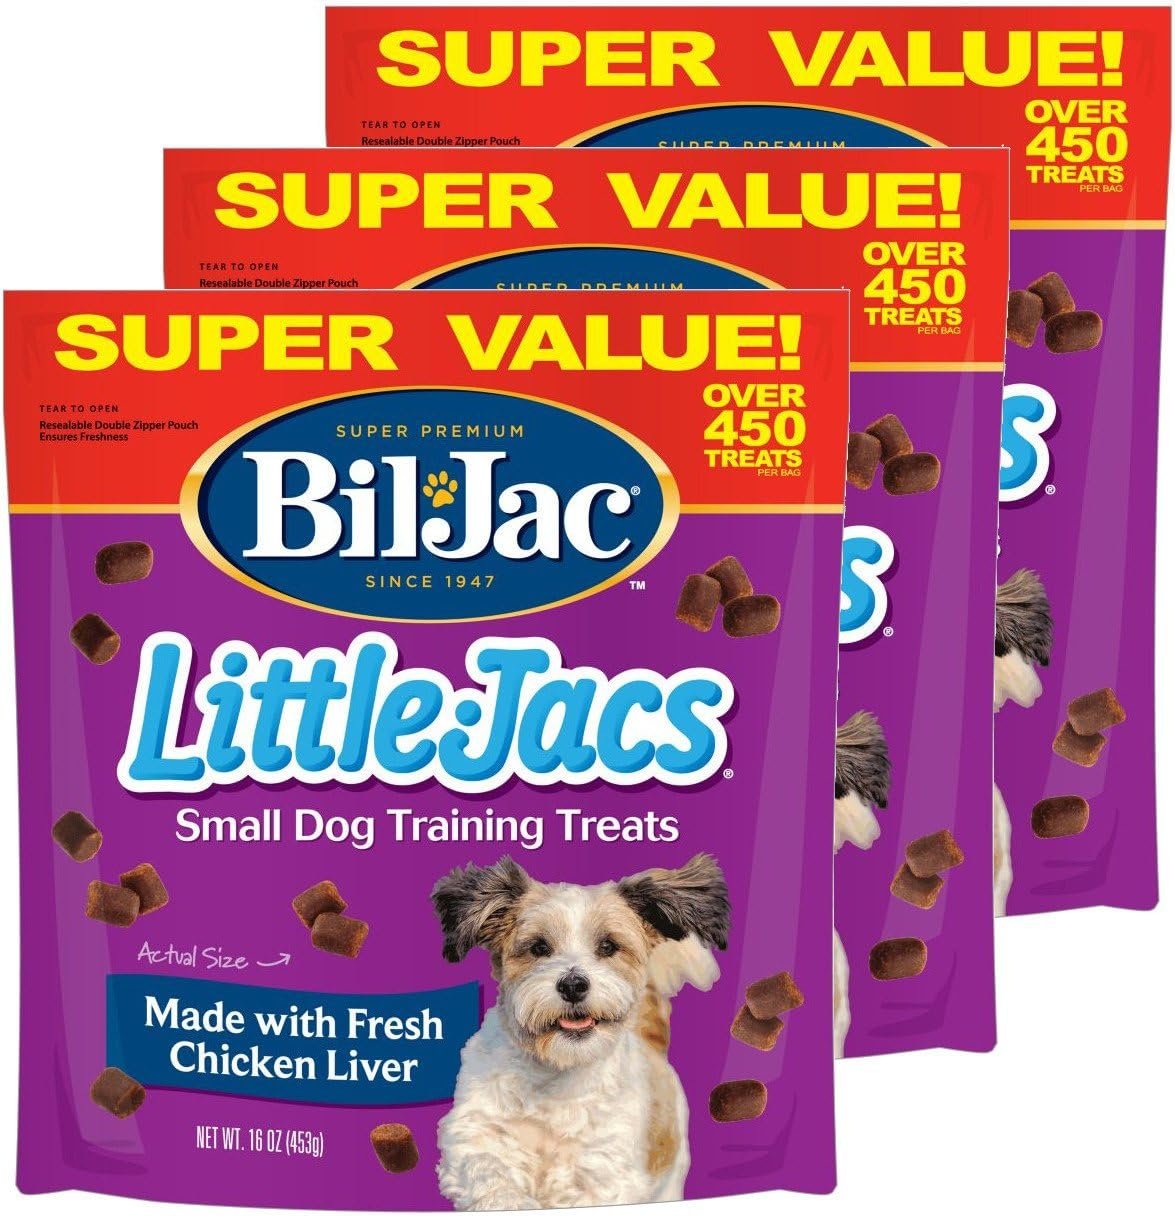 Bil-Jac Little Jacs Small Dog Training Treats - Soft Chicken Liver Dog Treats for Puppy Rewards - Real Chicken, No Fillers, 16oz Resealable Double Zipper Pouch (3-Pack)